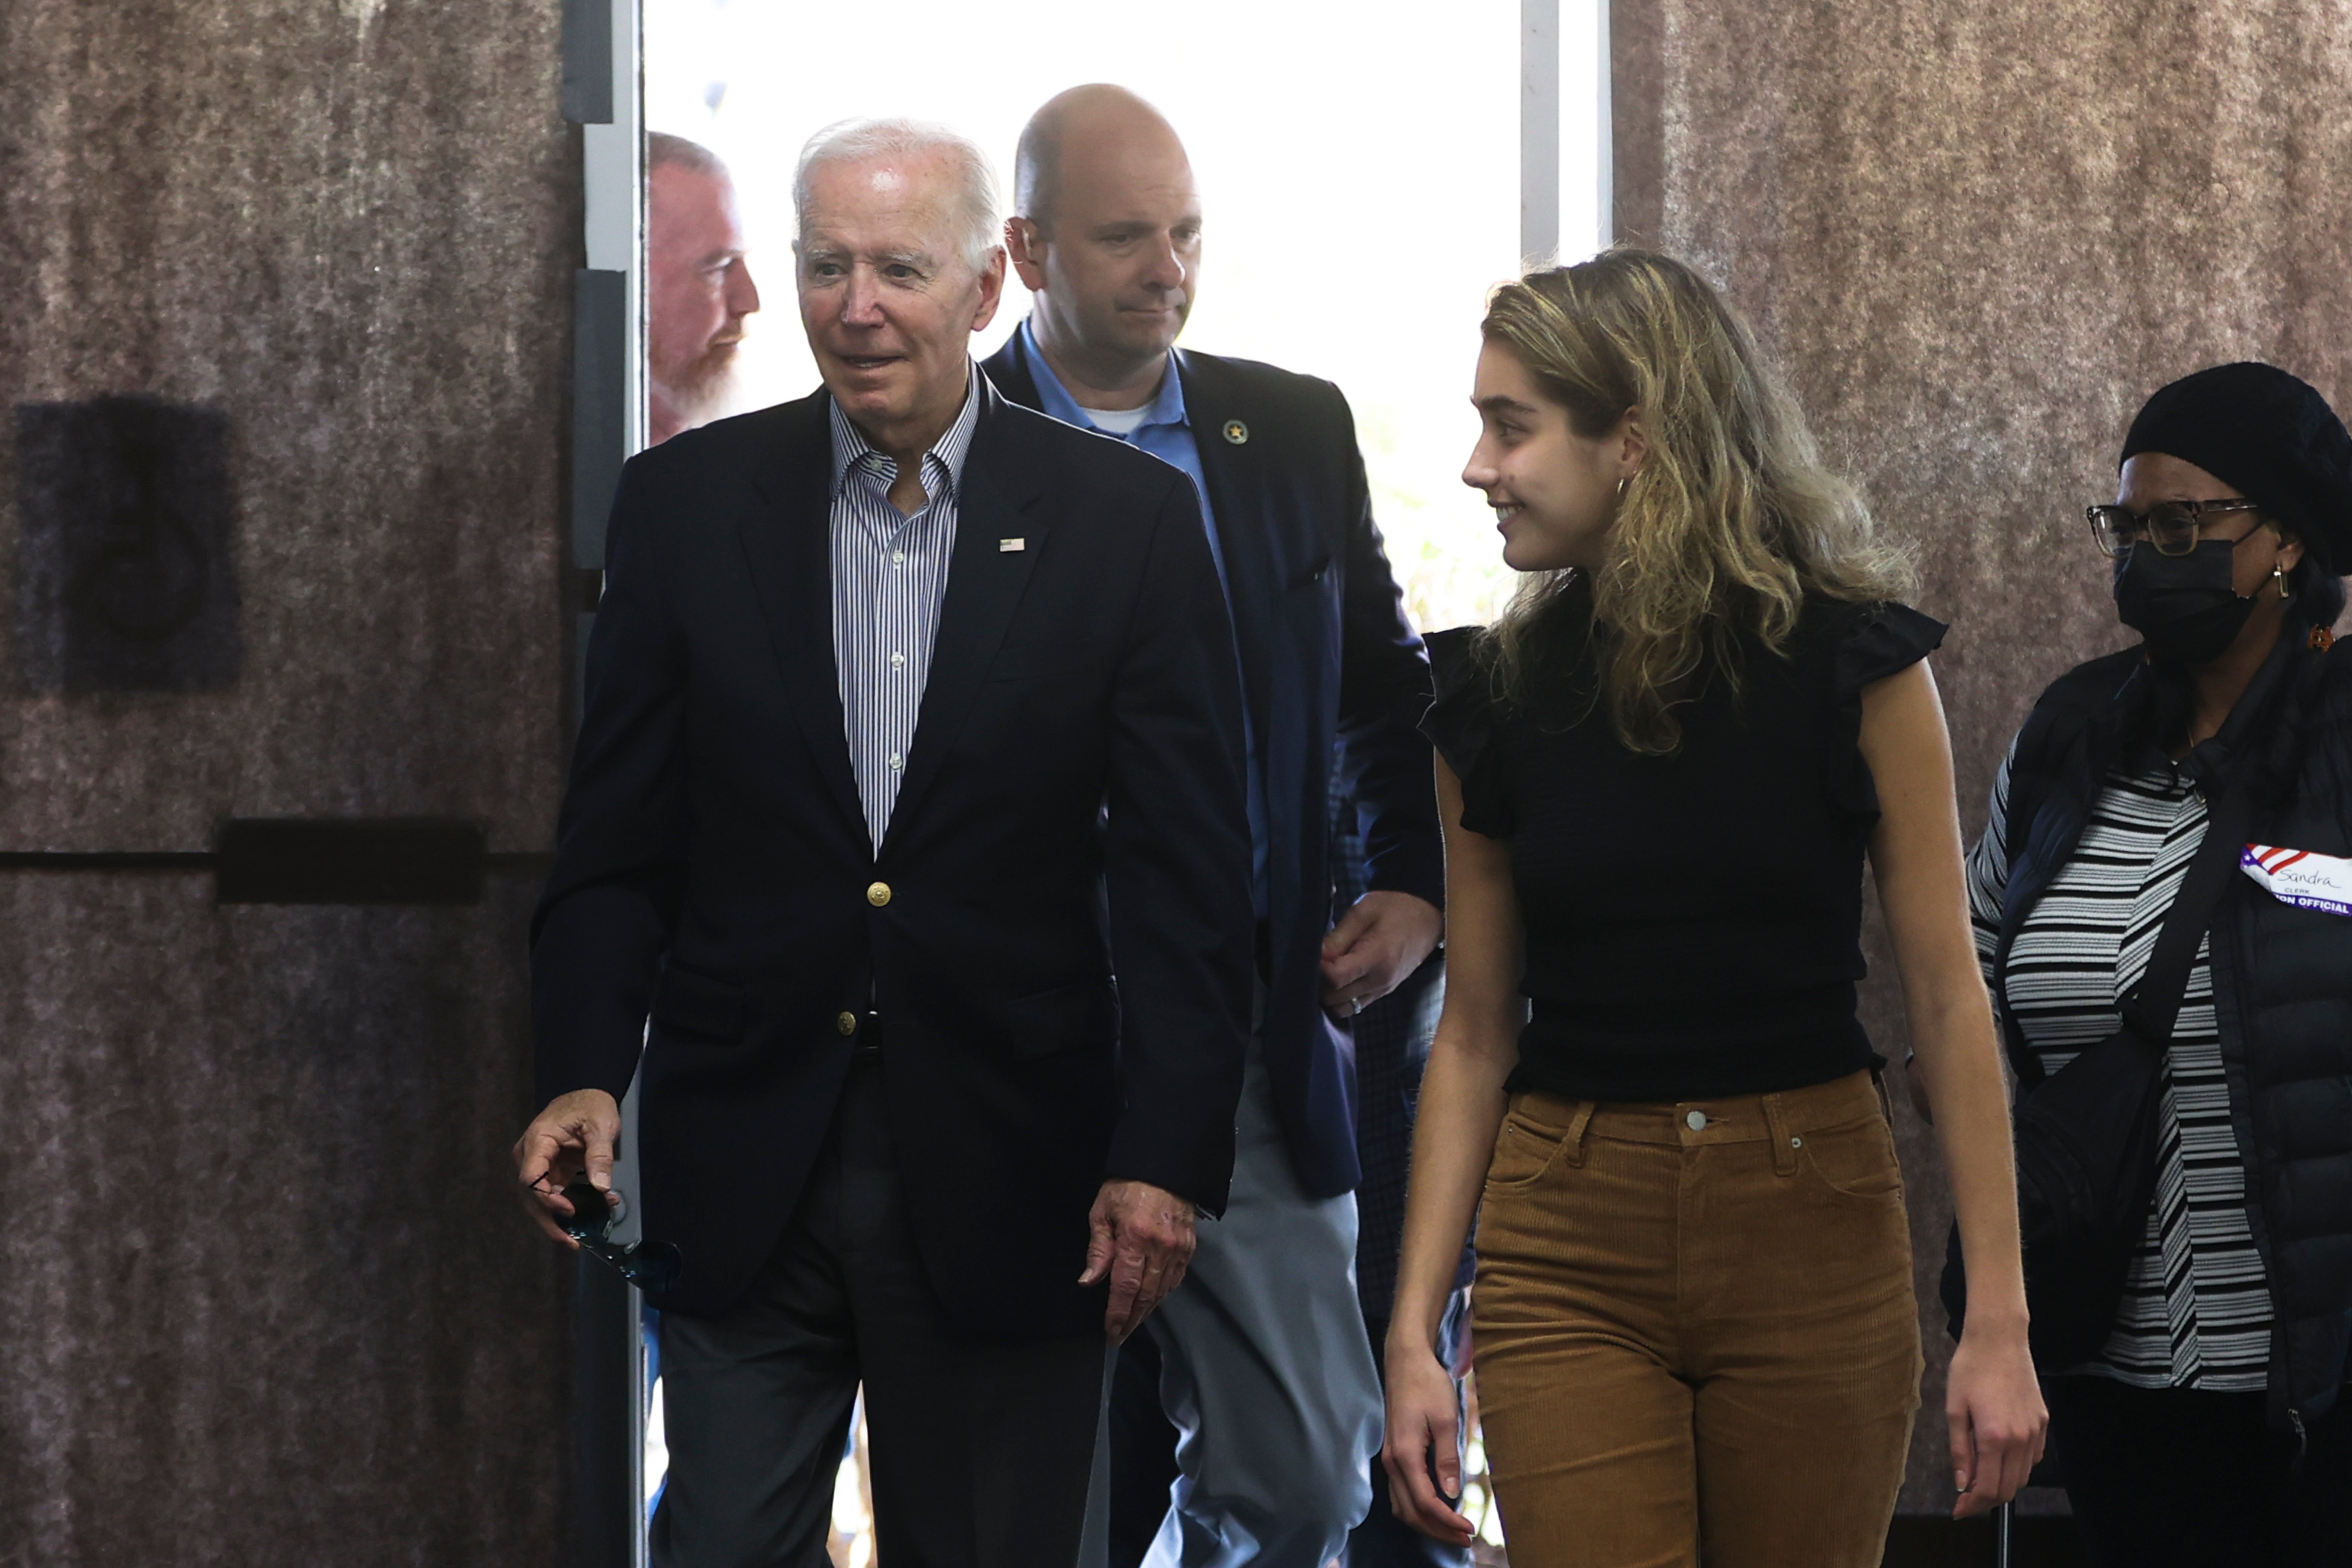 President Joe Biden arrives to cast his vote during early voting for the 2022 U.S. midterm elections with his granddaughter Natalie Biden, a first-time voter, at a polling station in Wilmington, Del., Saturday, Oct. 29, 2022. (Tasos Katopodis/Pool Photo via AP)